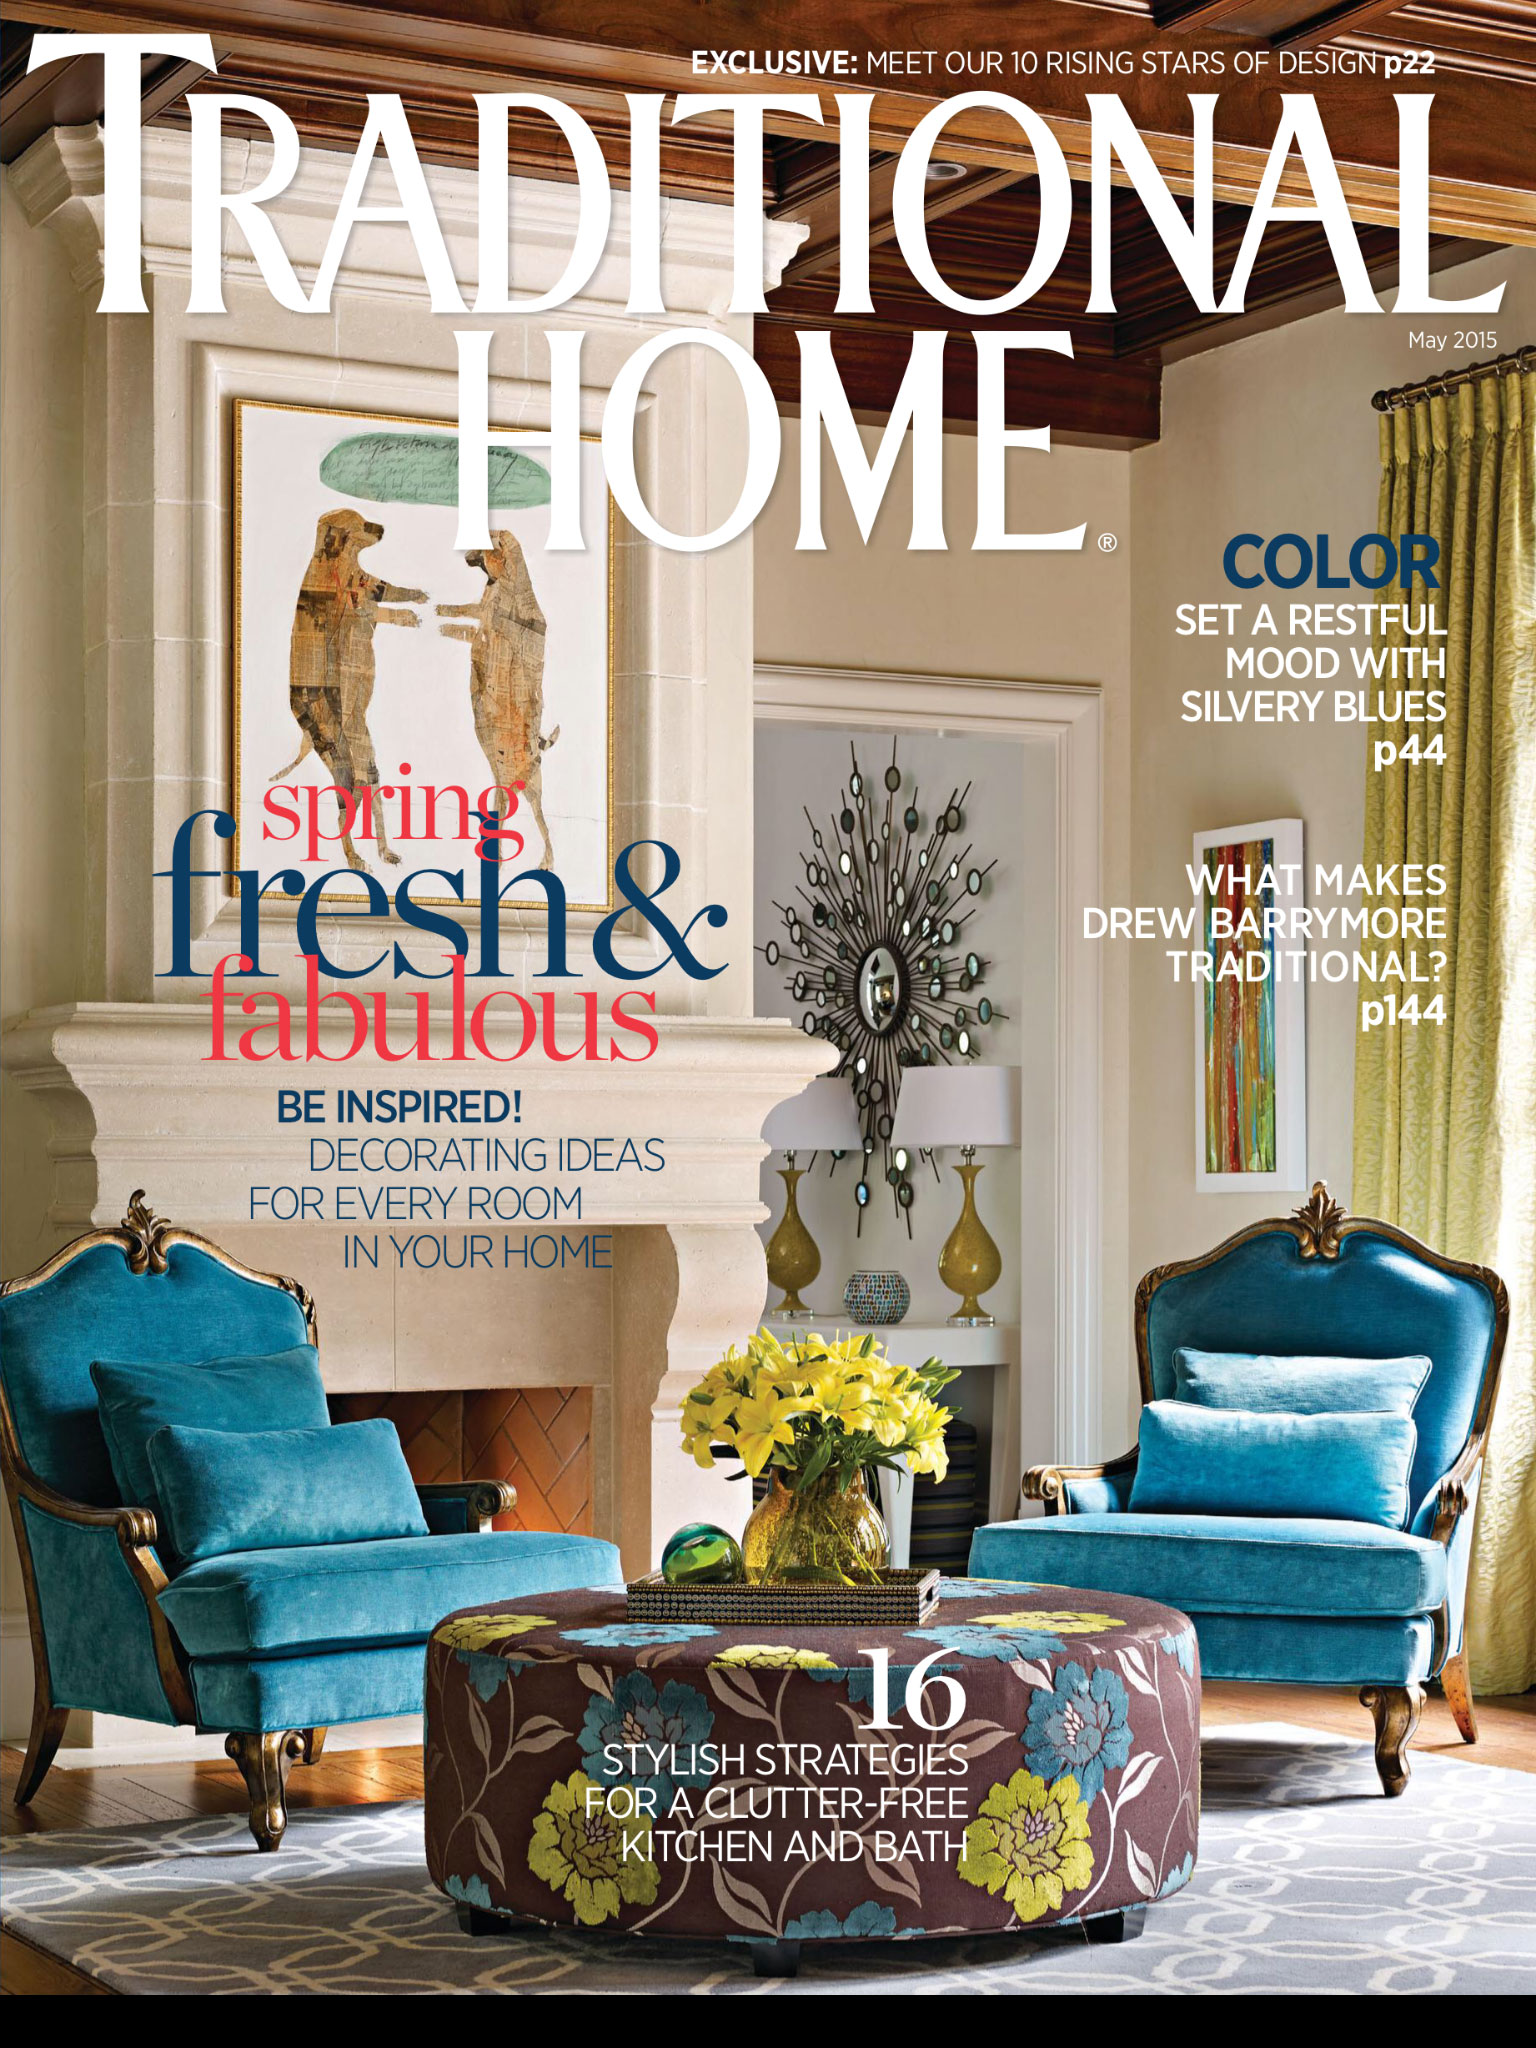 201507-TraditionalHome-cover.jpg